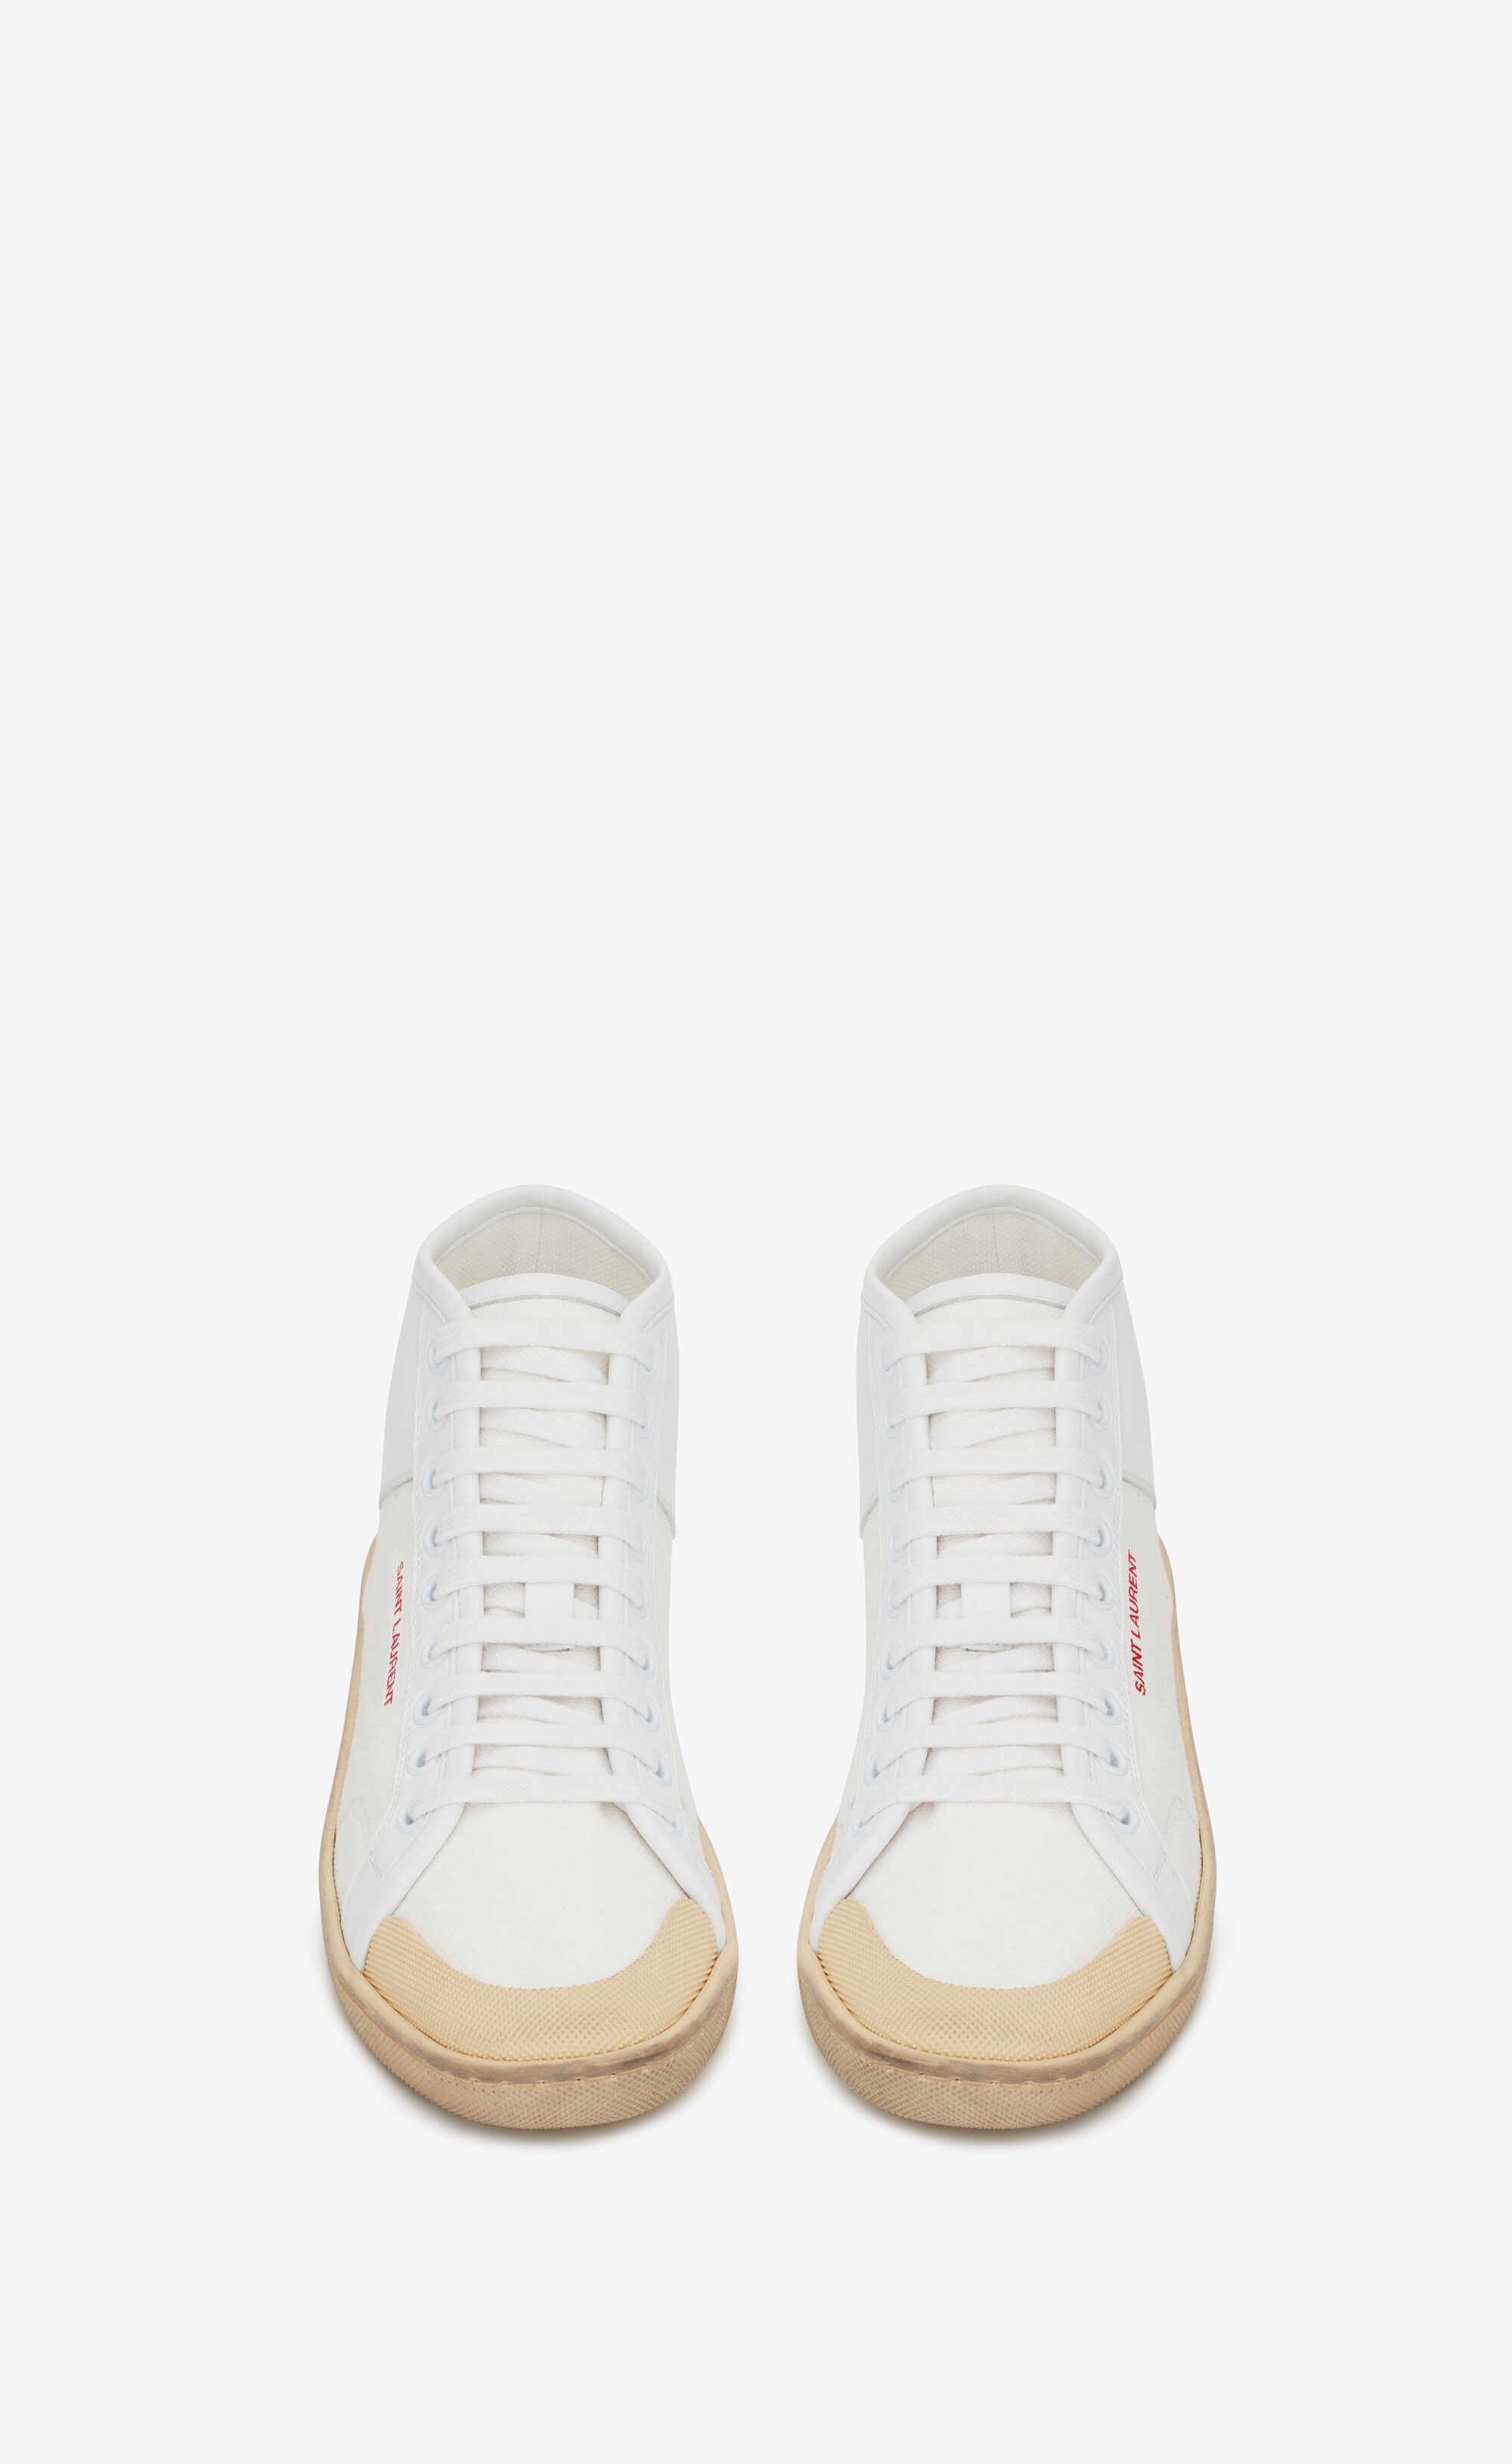 court classic sl/39 mid-top sneakers in canvas and leather - 2